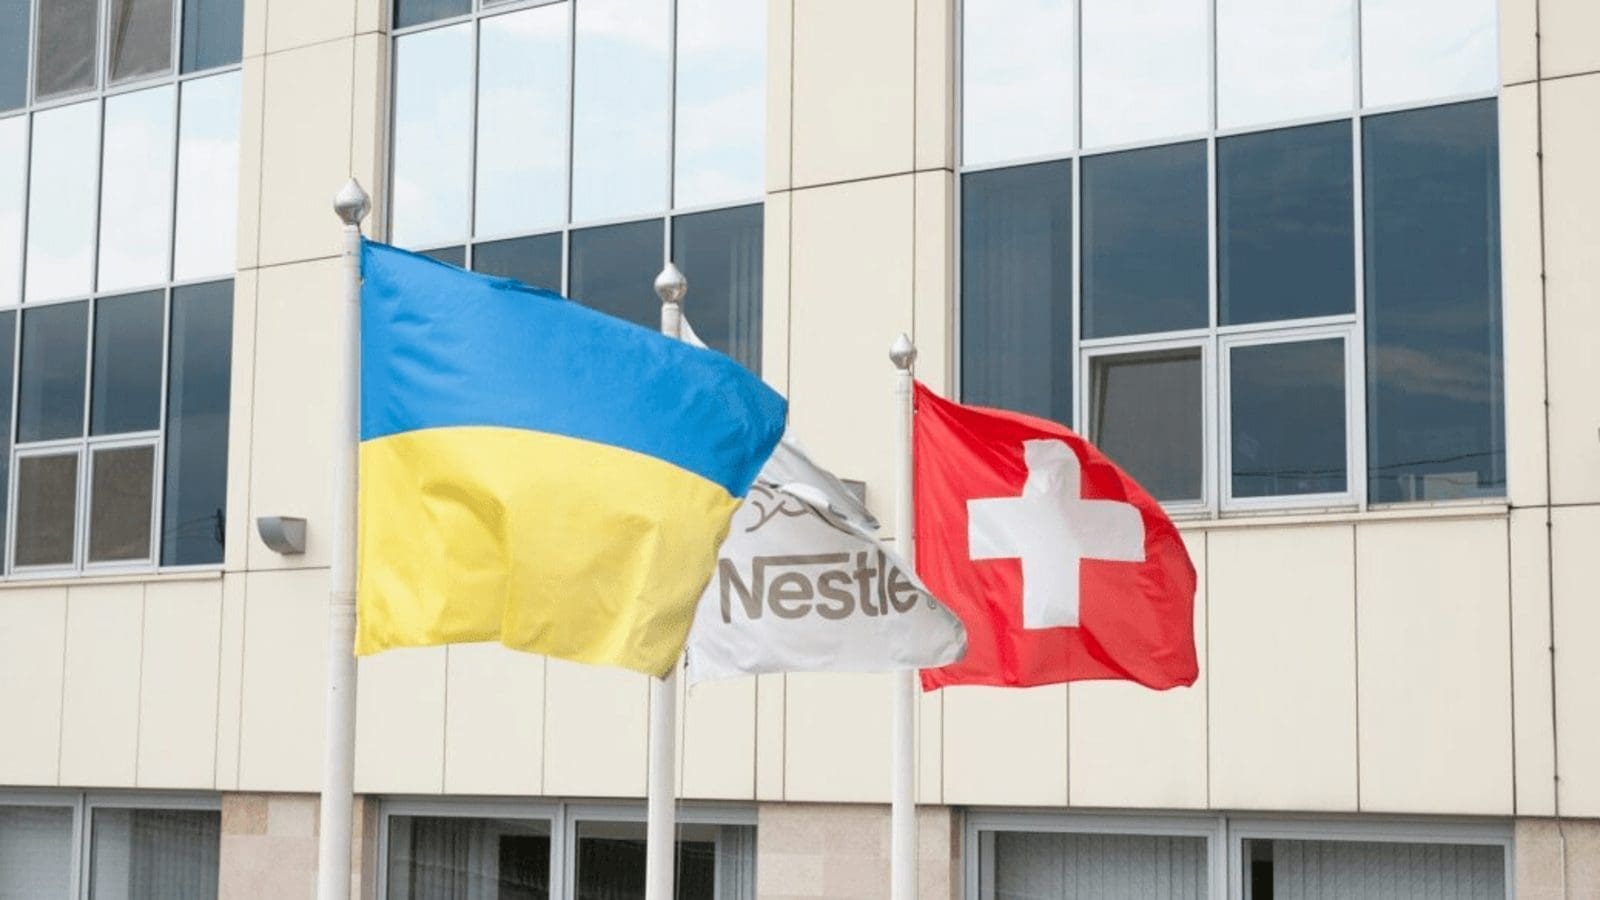 Nestlé temporarily closes factories, warehouses in Ukraine in wake of Russia invasion 